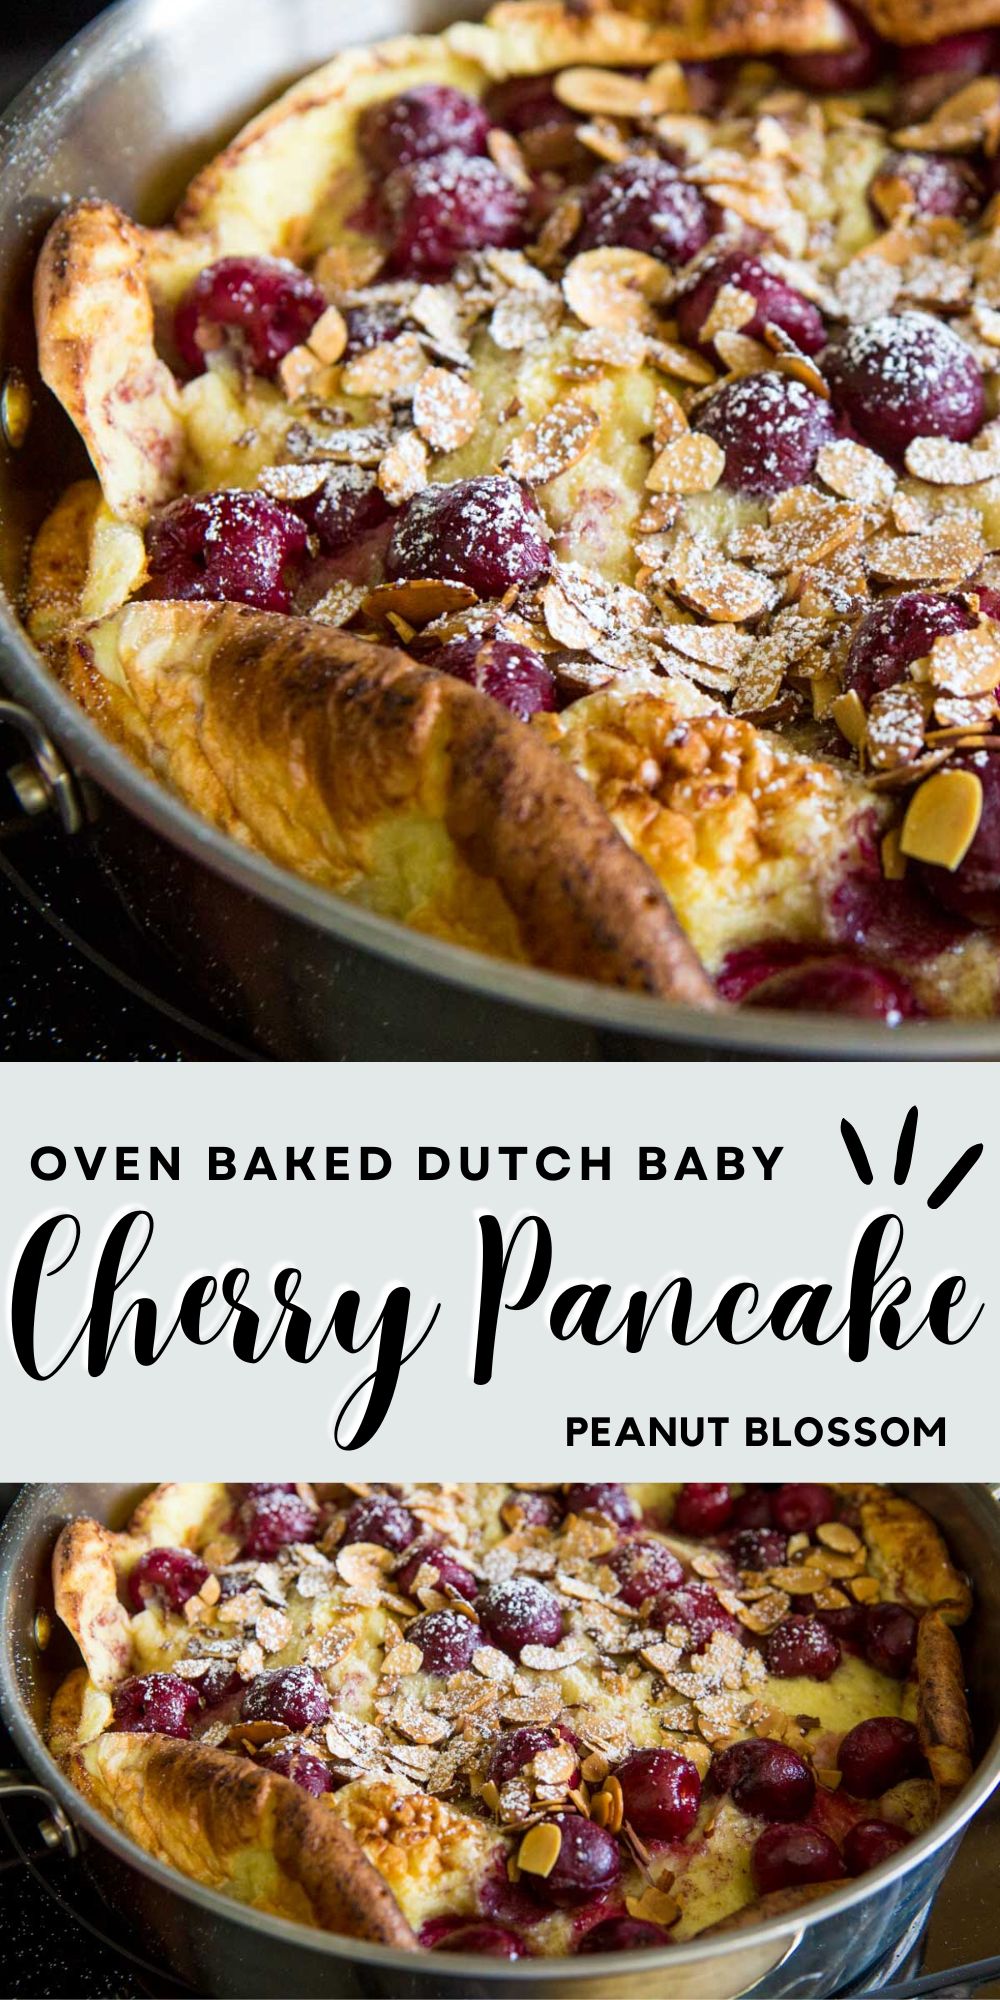 The skillet is filled with the cherry pancake that has sliced almonds and powdered sugar over the top.